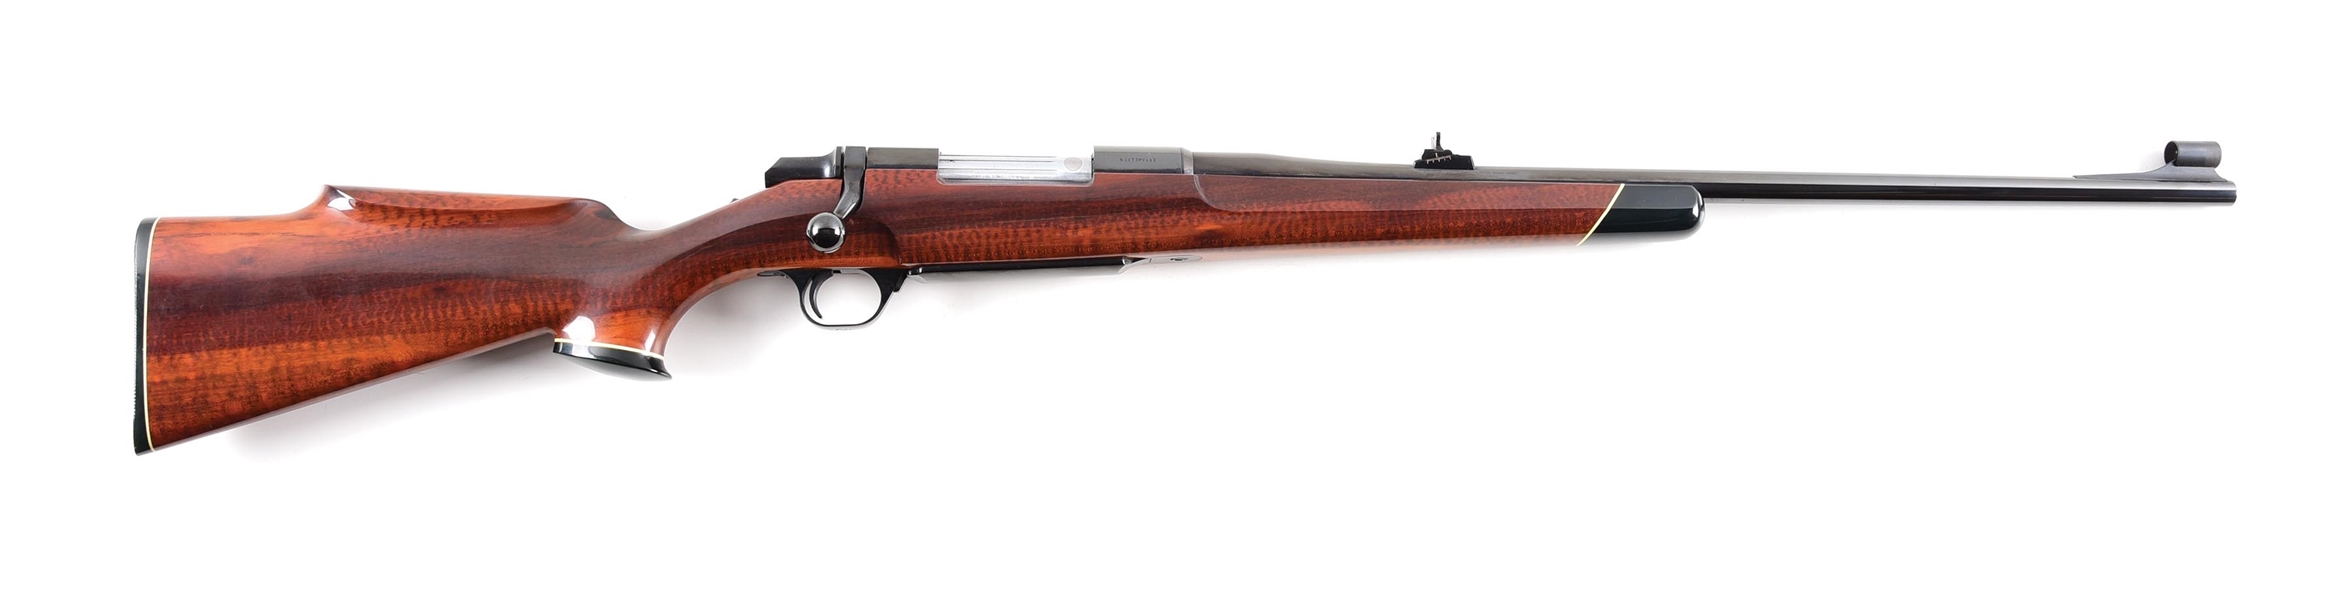 (M) BROWNING BBR BOLT ACTION RIFLE WITH SNAKEWOOD STOCK.